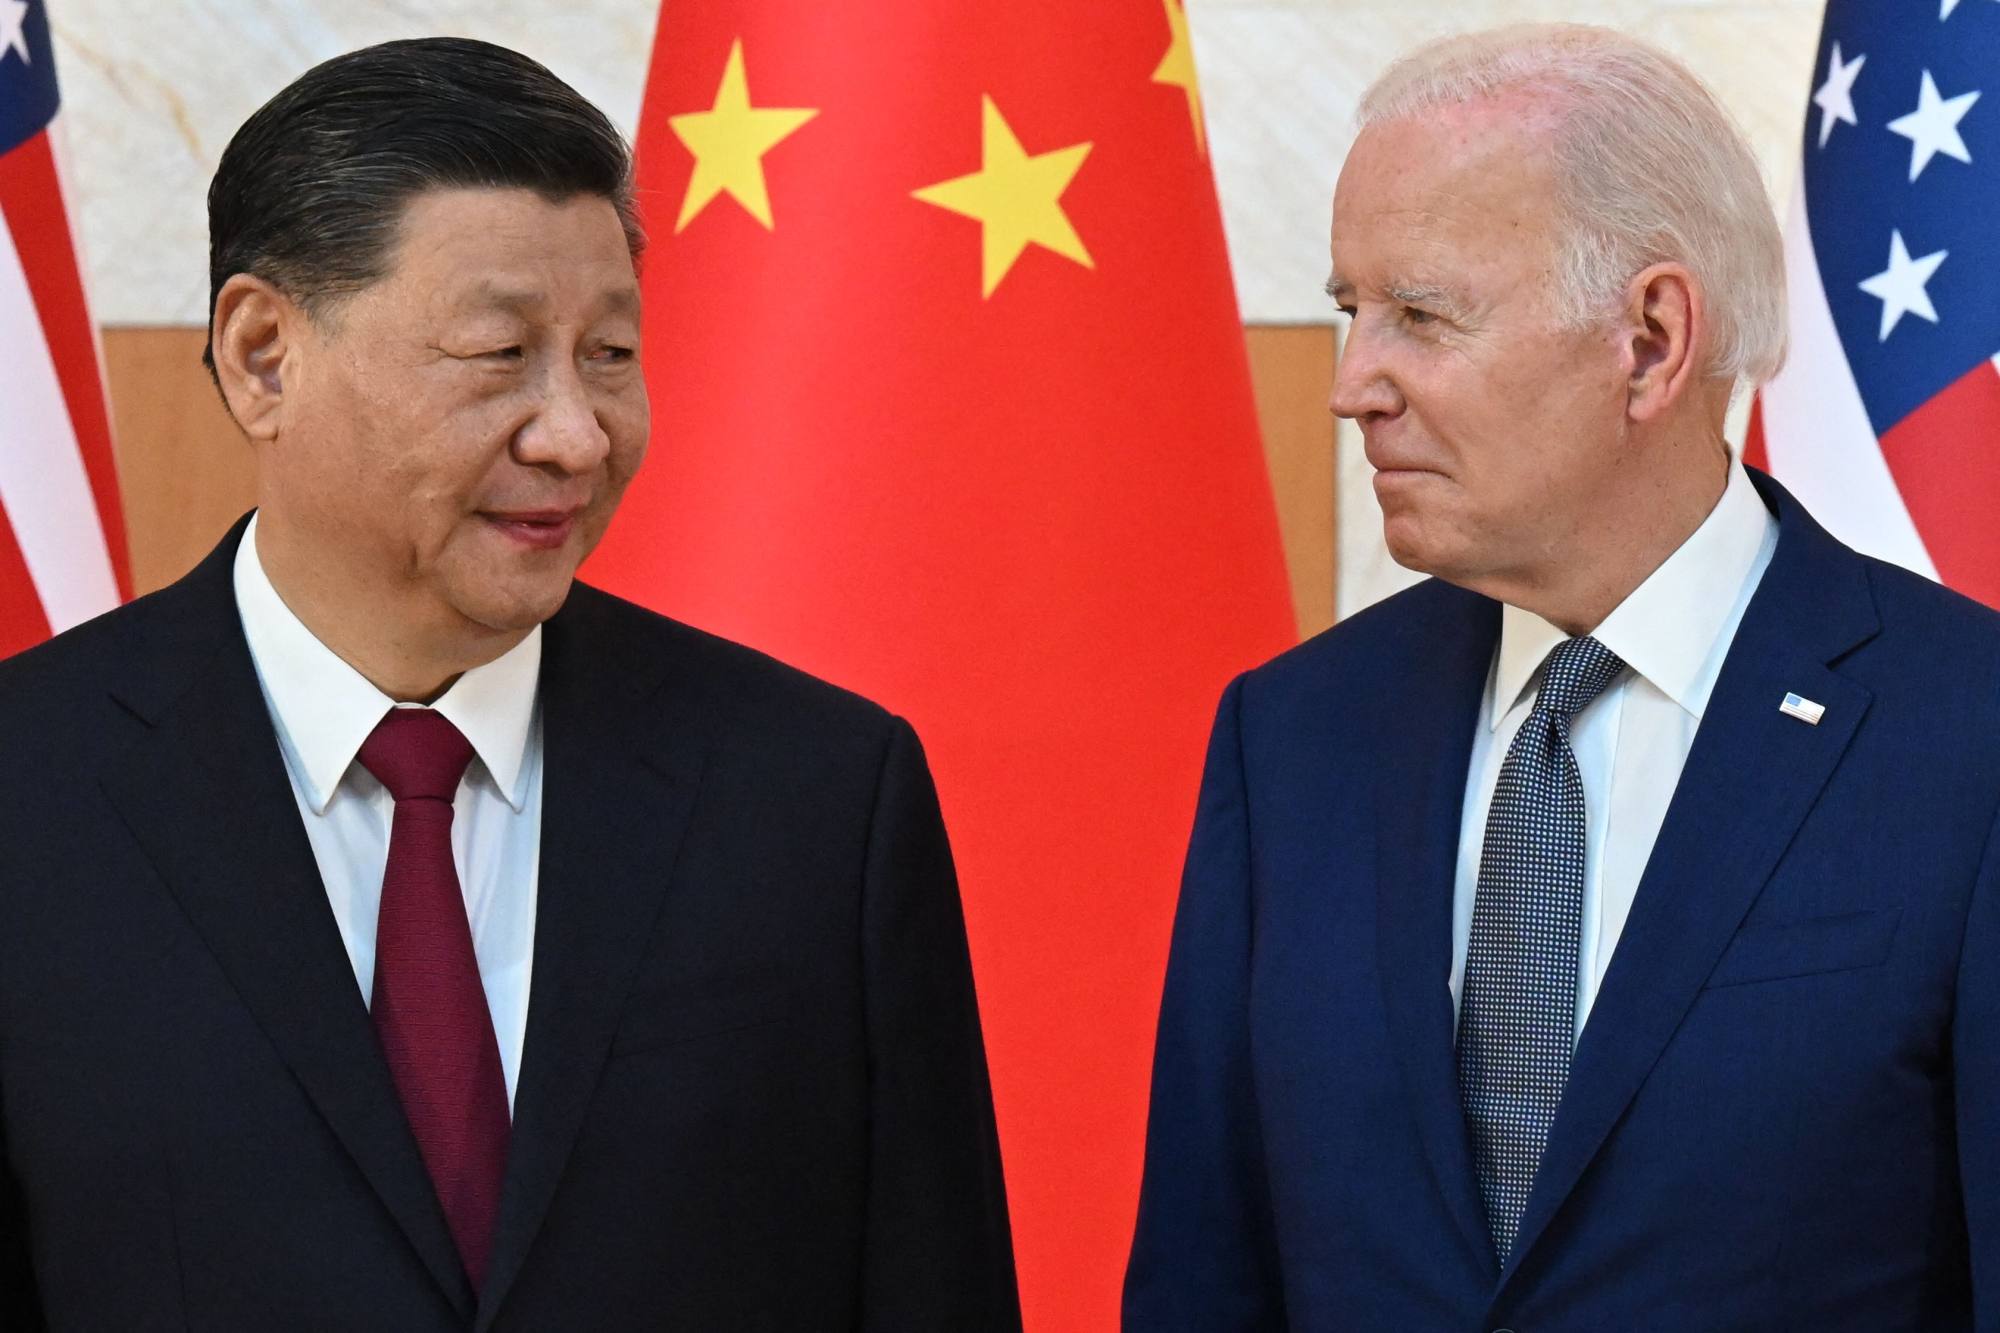 china-us relations: american state department official explains how beijing risks crossing ‘red line’ with russia